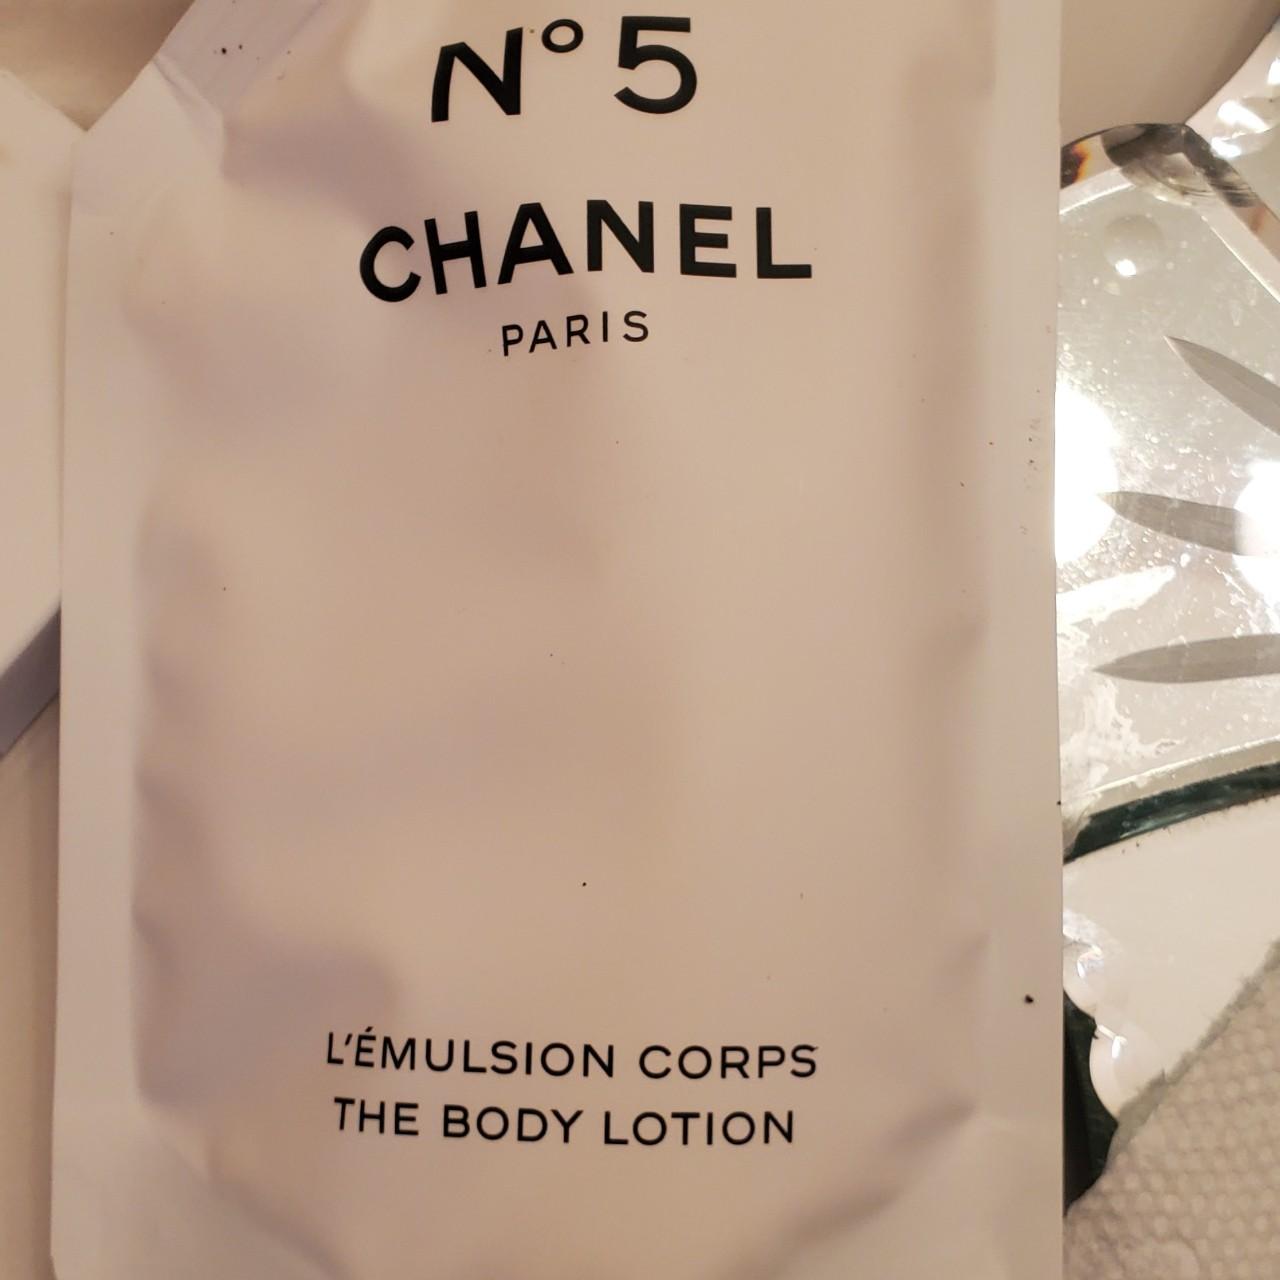 Chanel No. 5 body lotion sealed brand new Factory 5 - Depop